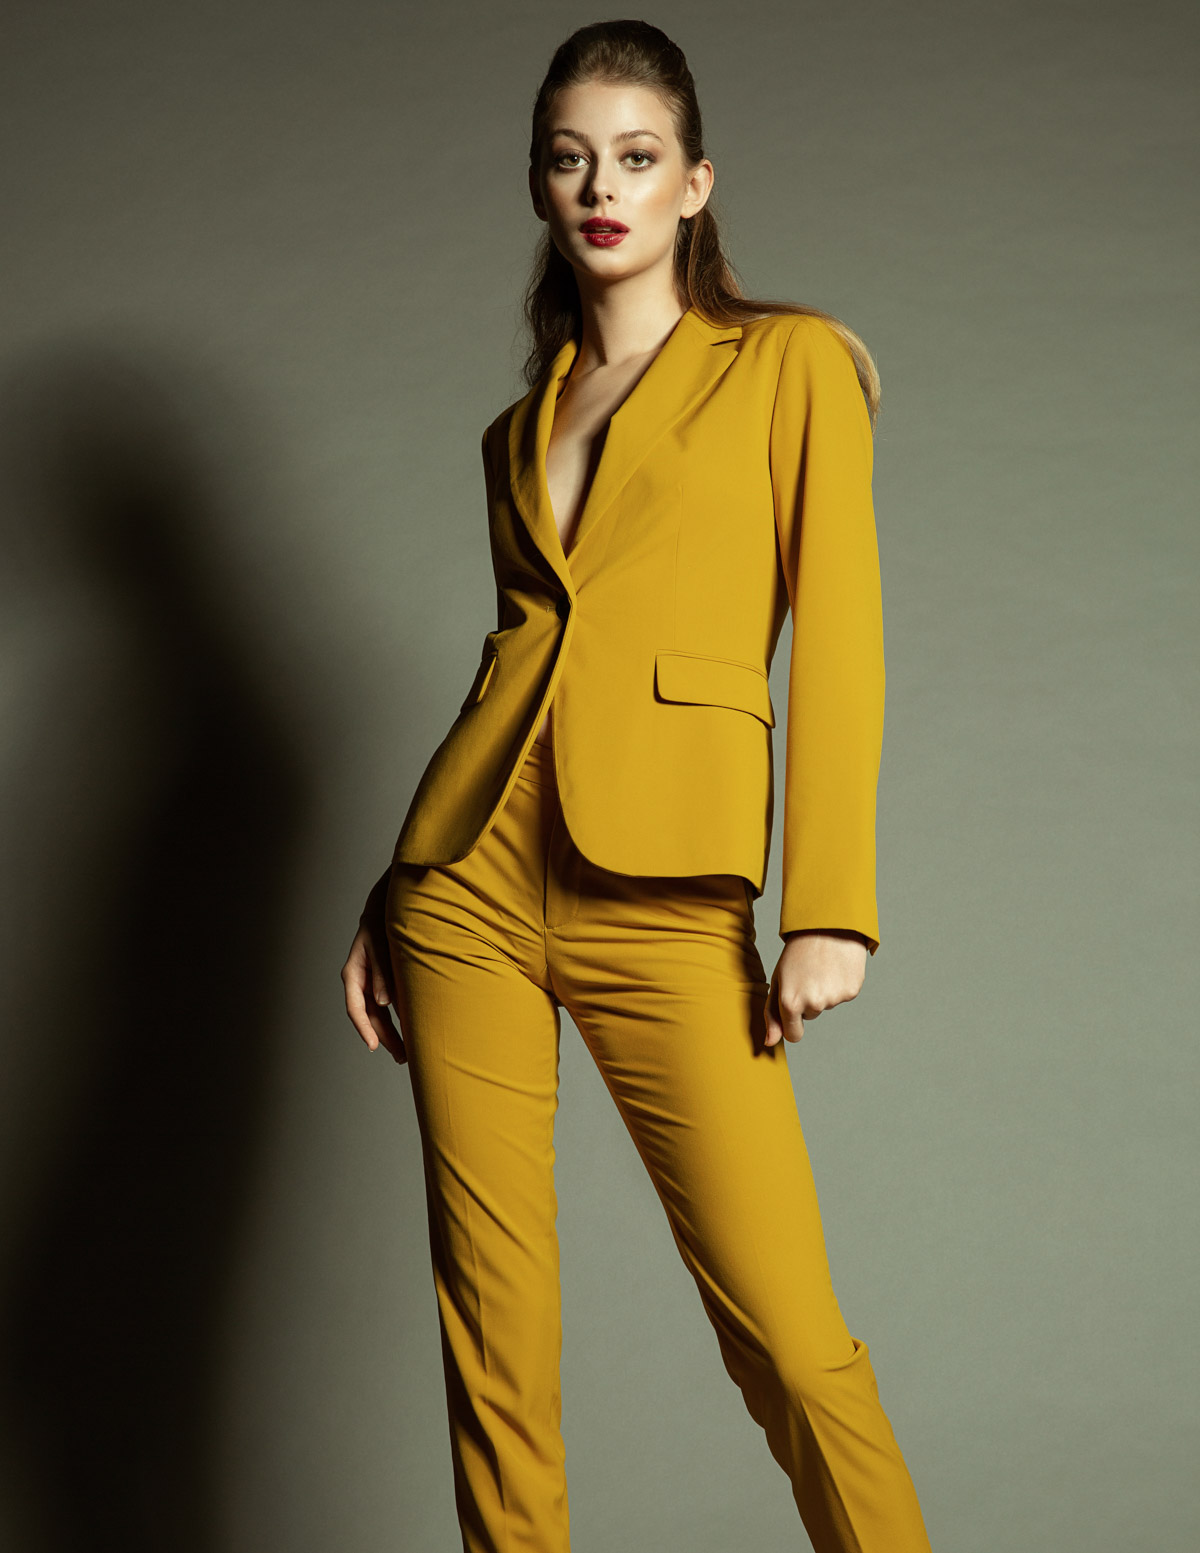 A fashion model posing in an all mustard coloured suit